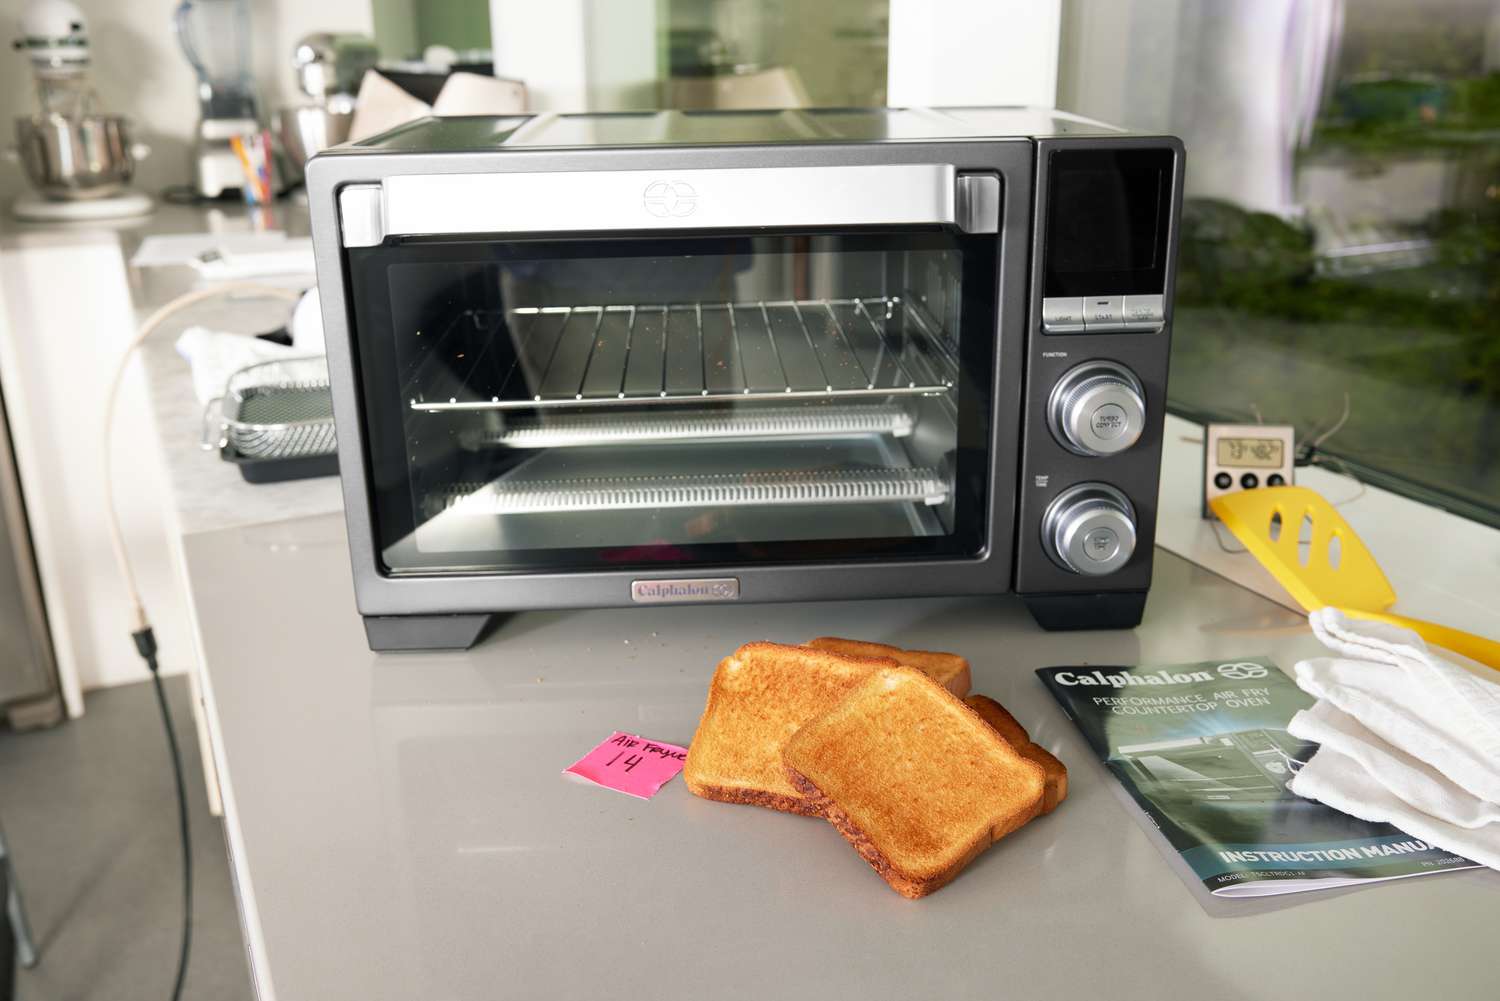 A Calphalon air fryer toaster on on a kitchen countertop